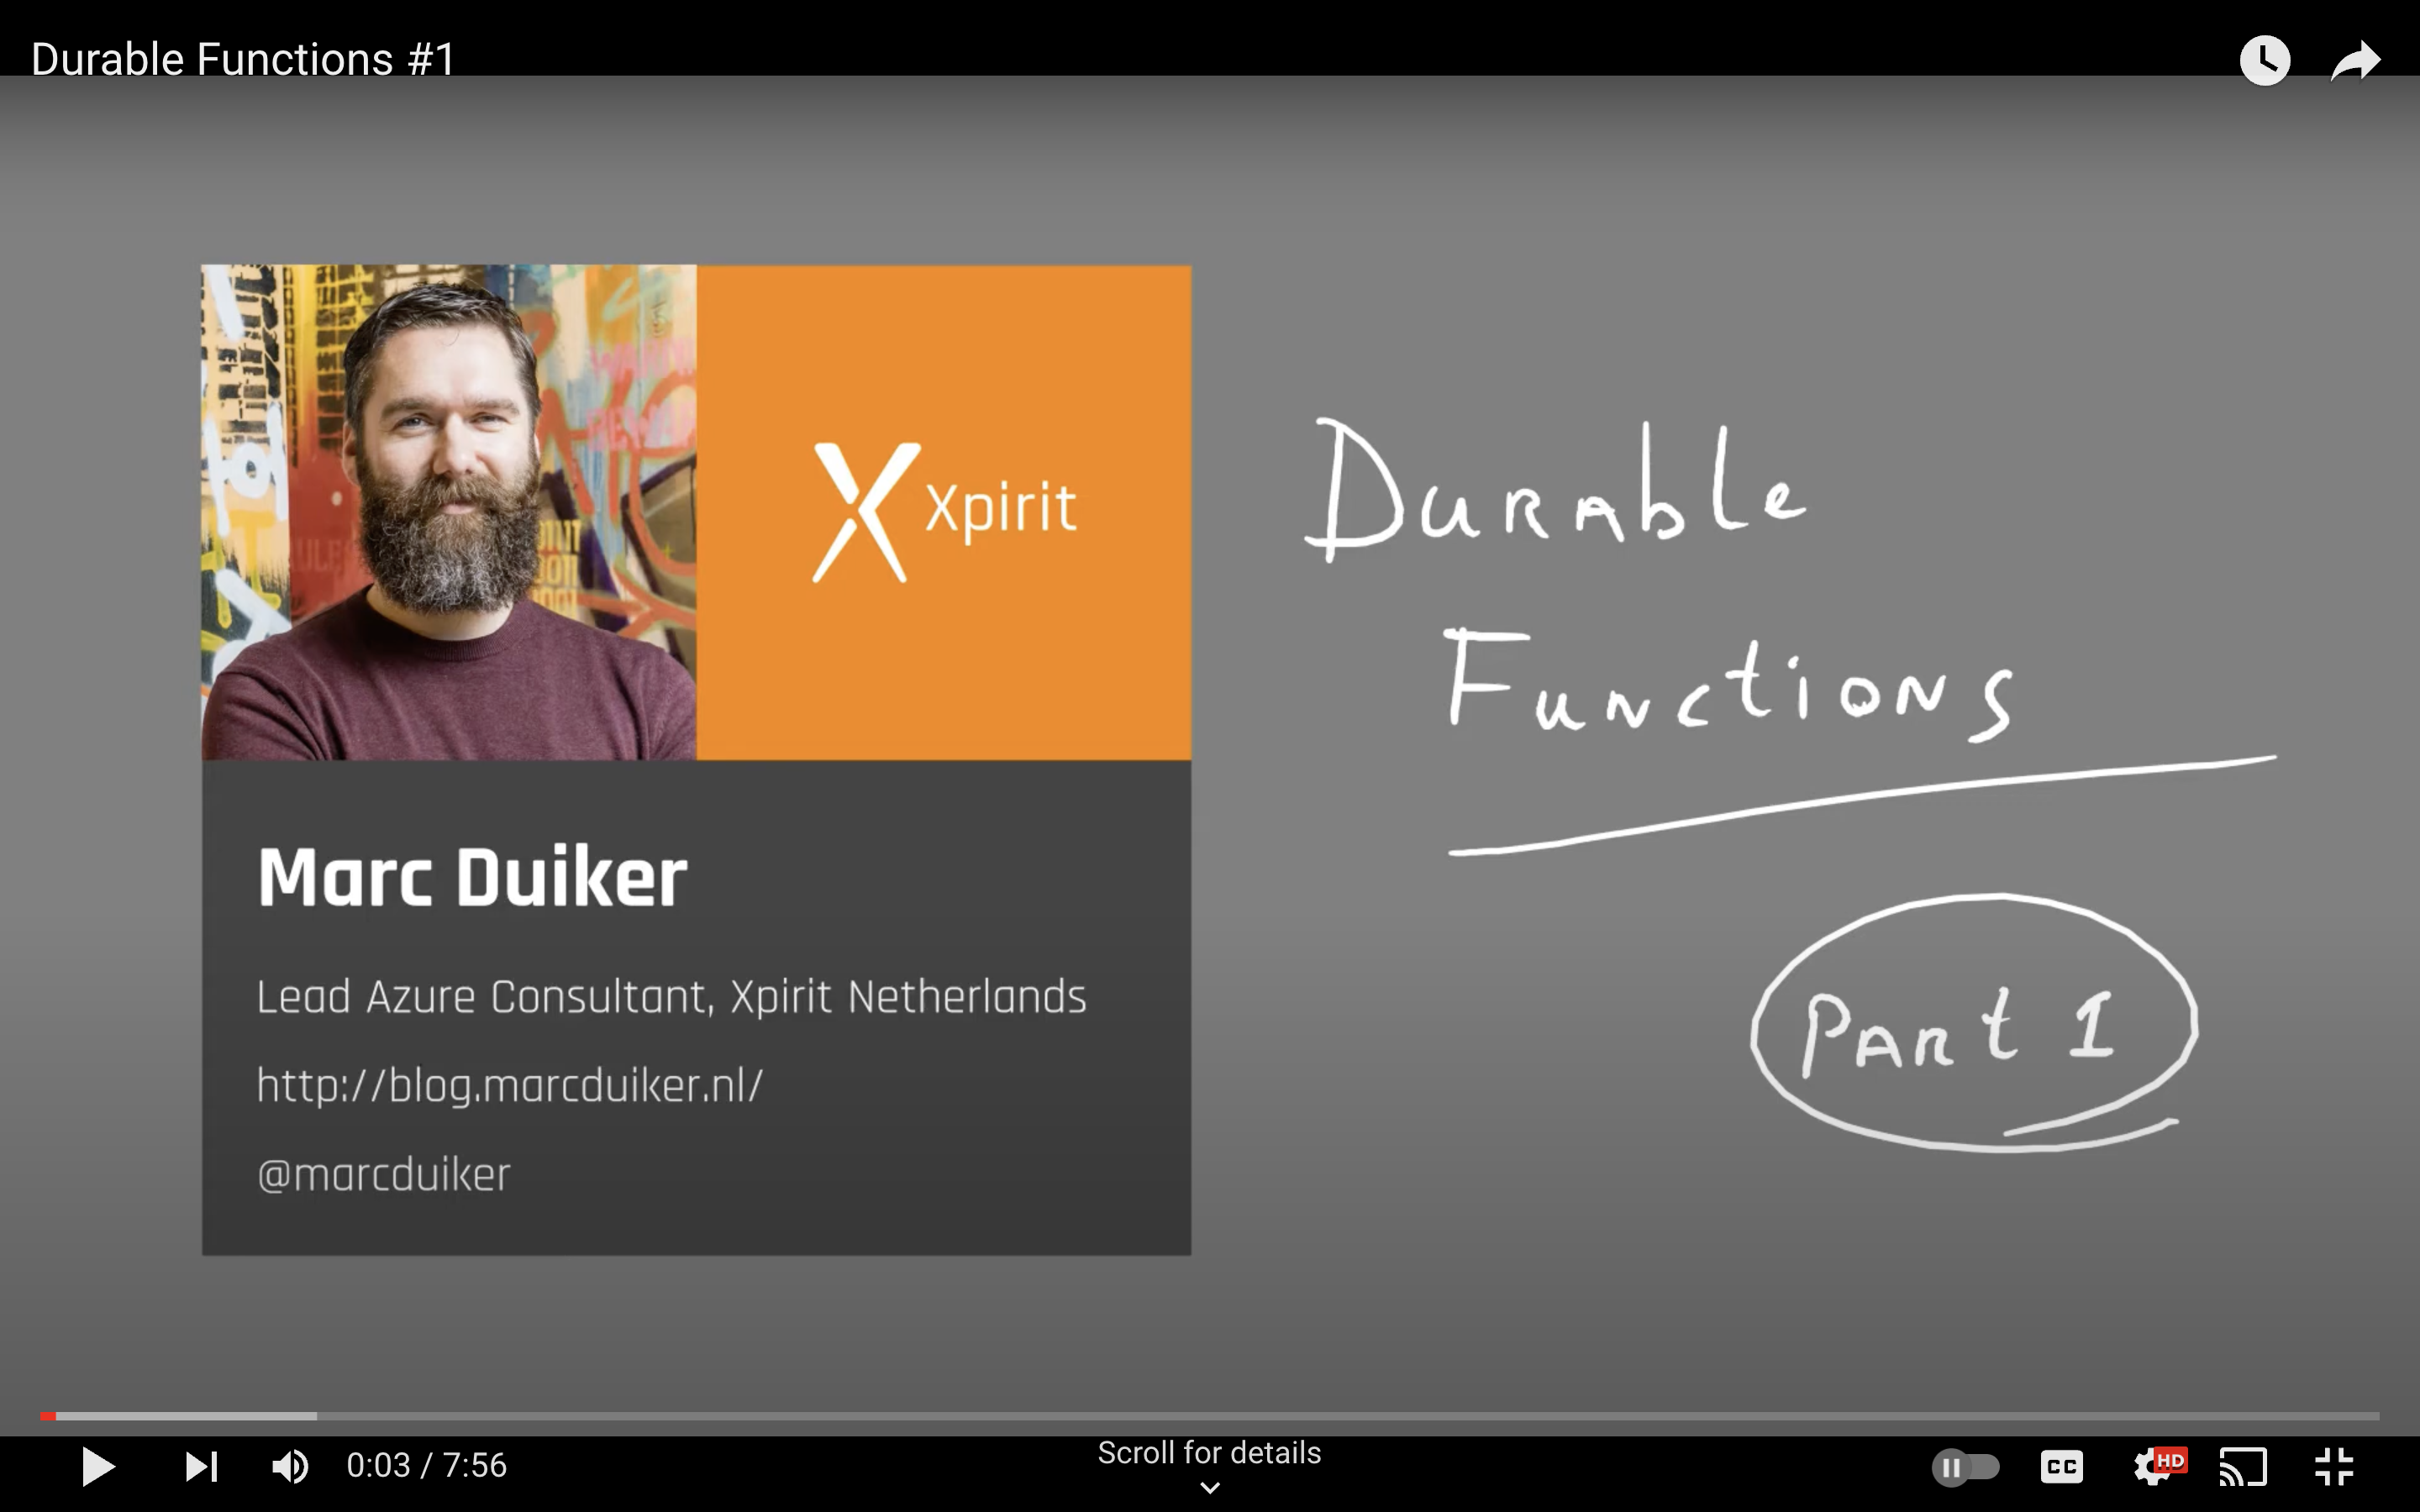 Durable Functions on YouTube (part 1)